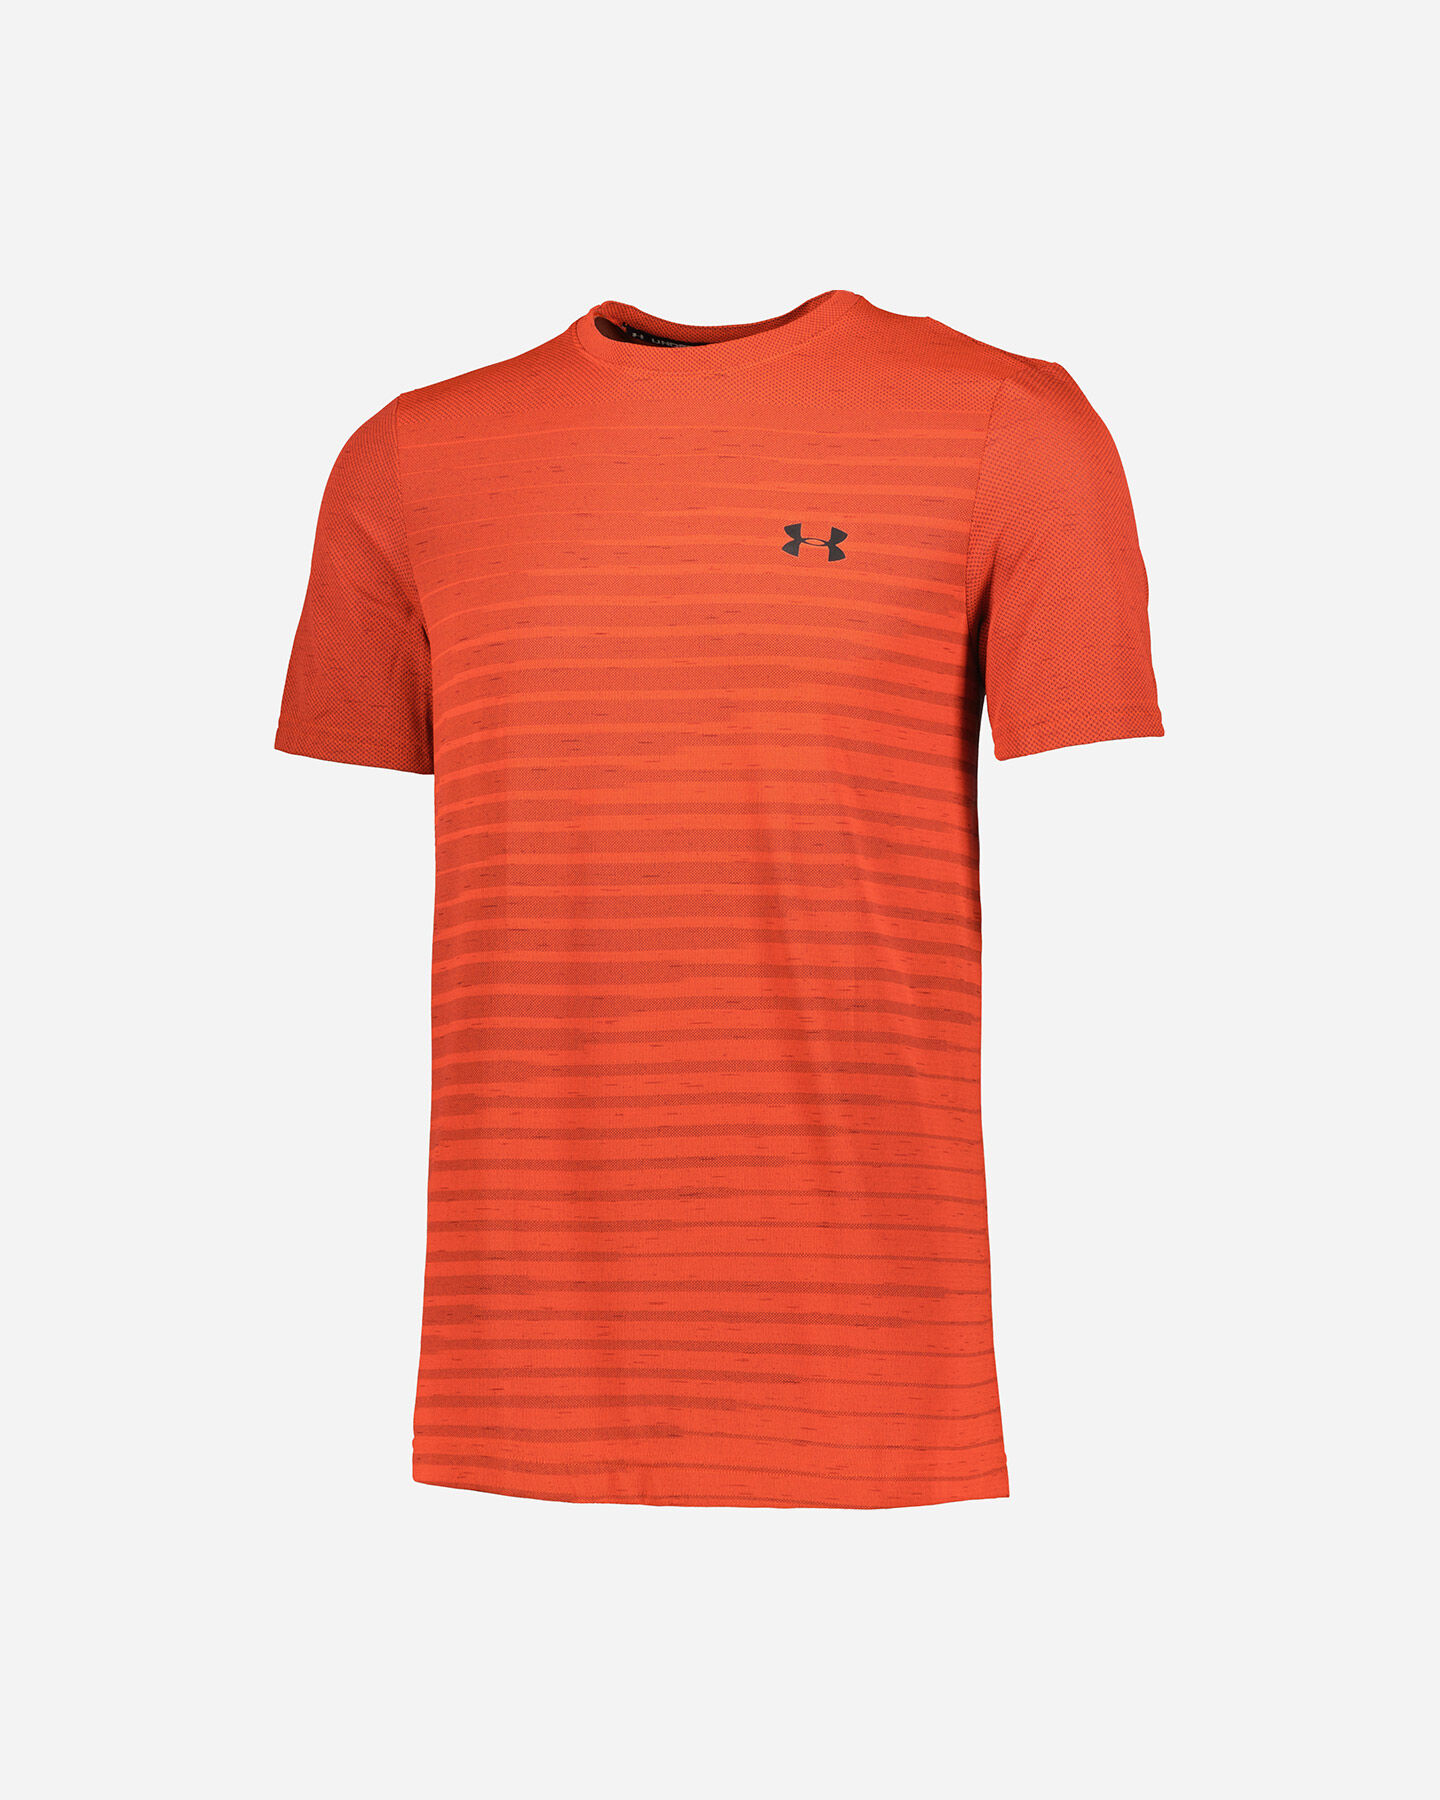  T-Shirt training UNDER ARMOUR SEAMLESS FADE M S5331824|0296|SM scatto 0